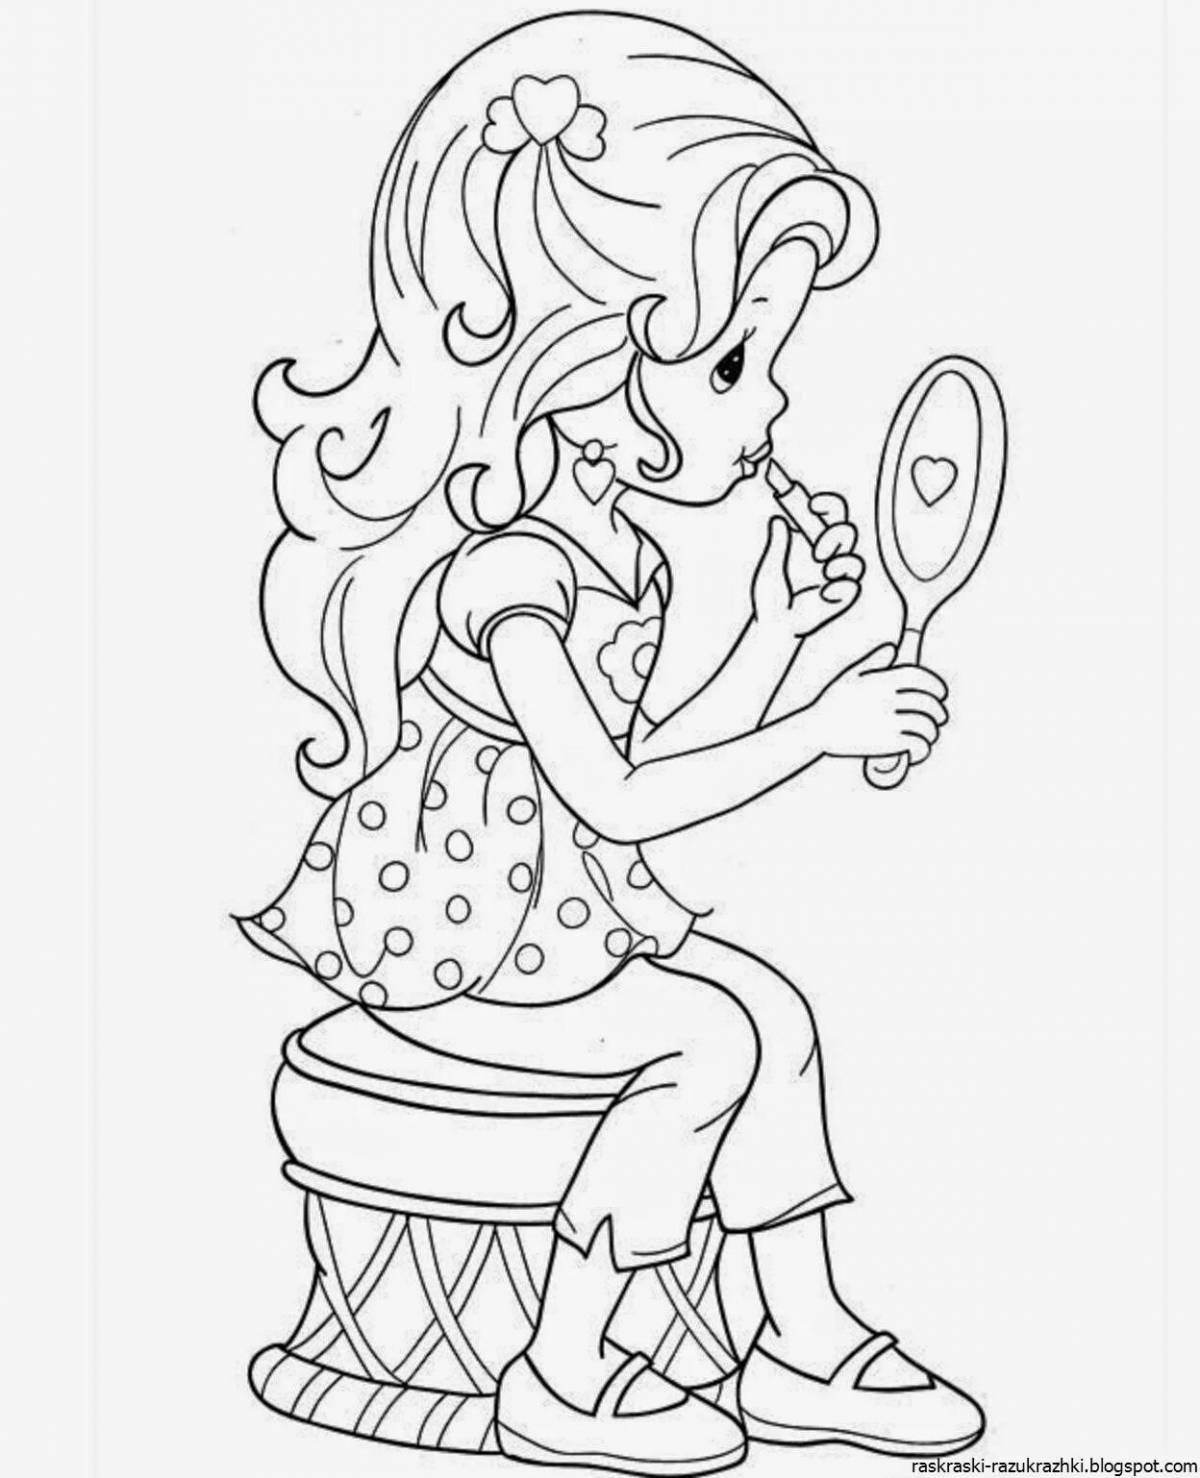 Fancy coloring book for girls 6-7 years old